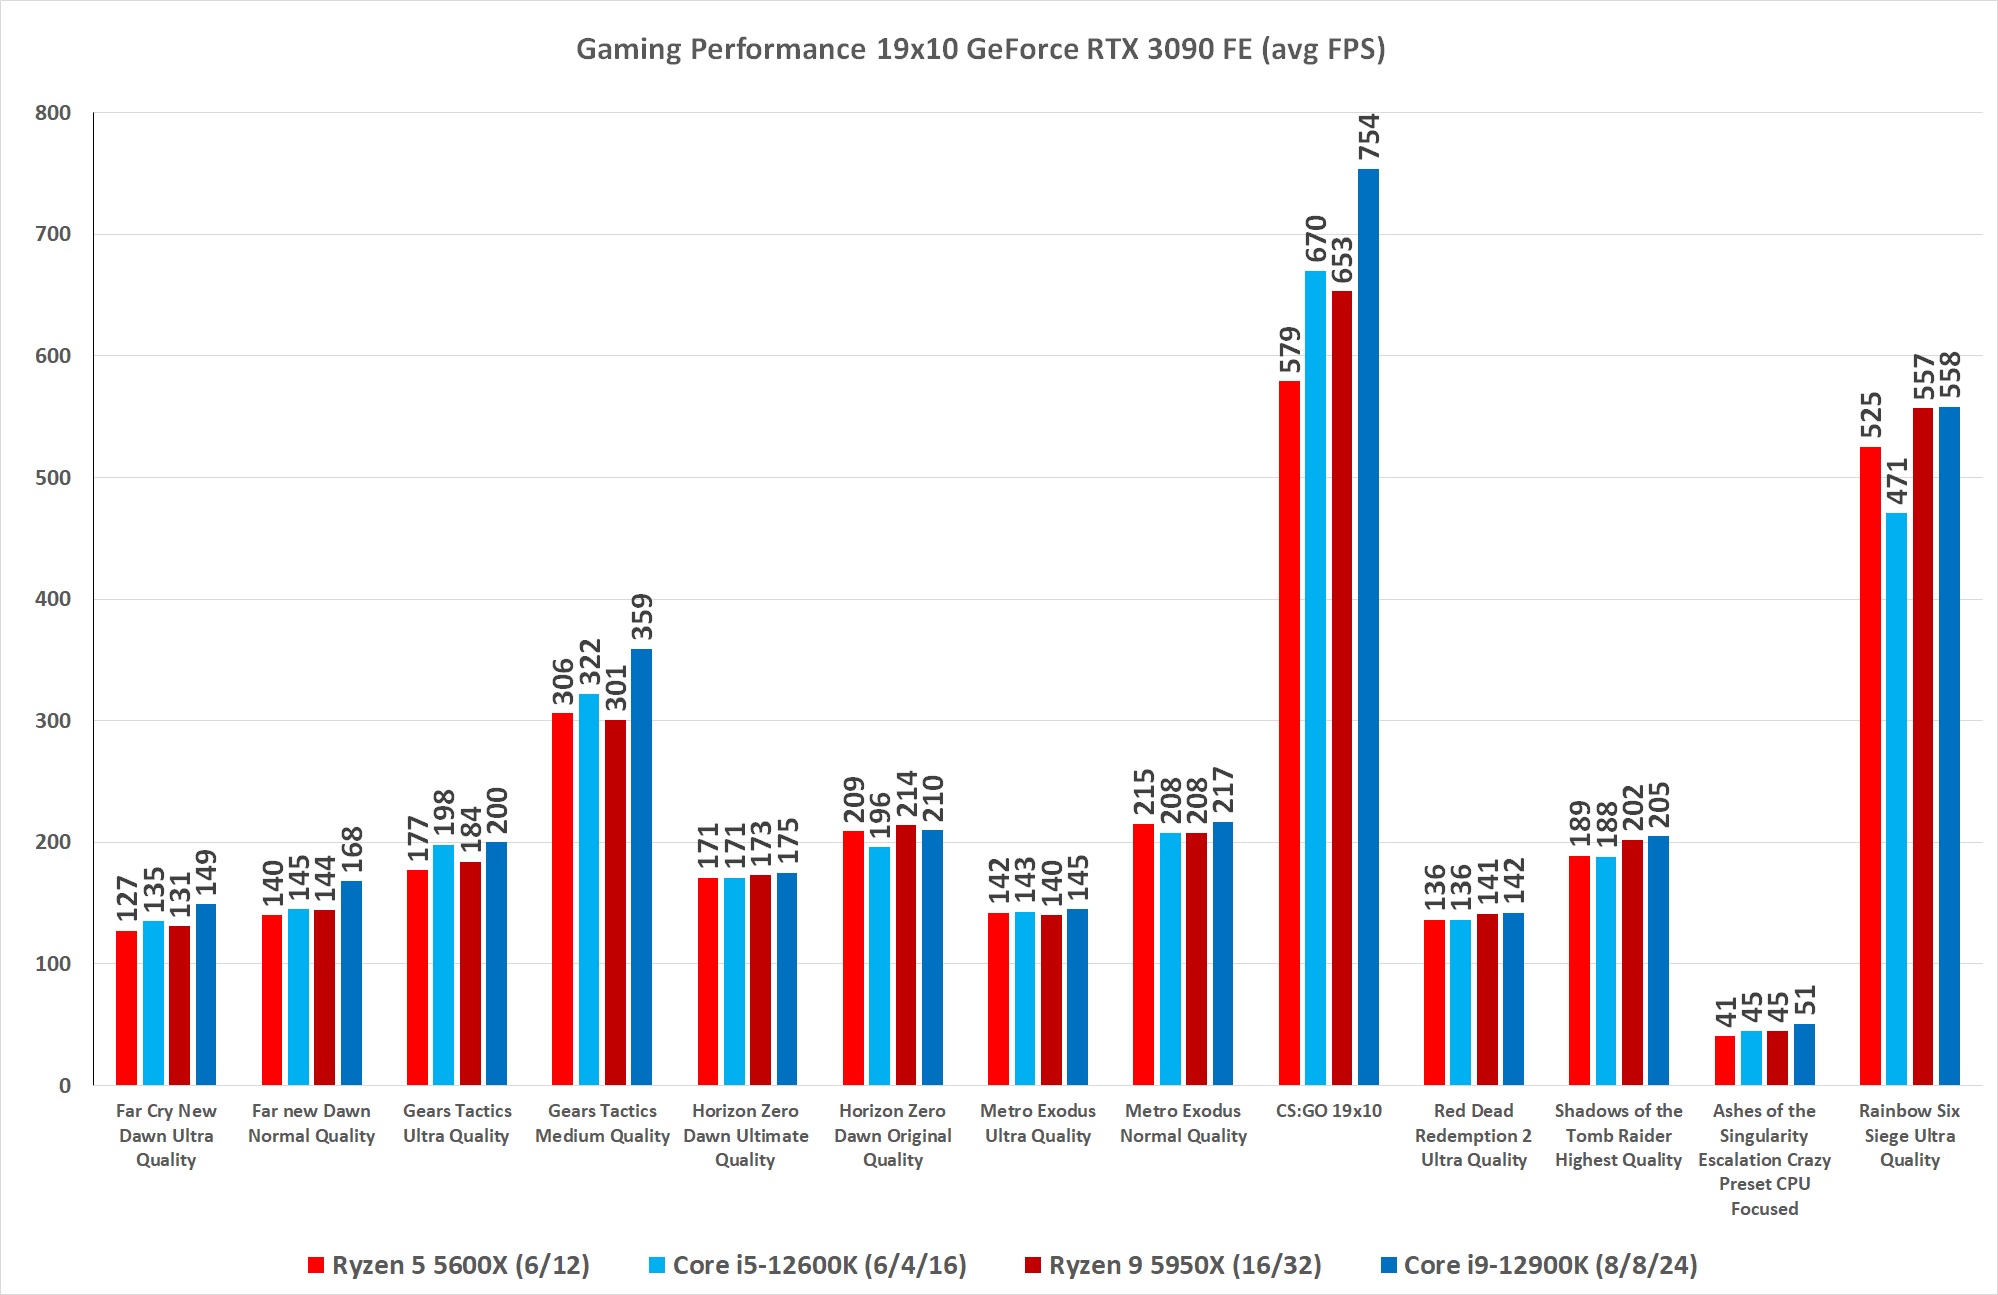 Image of performance benchmarks between 12th gen Intel and Ryzen 5000